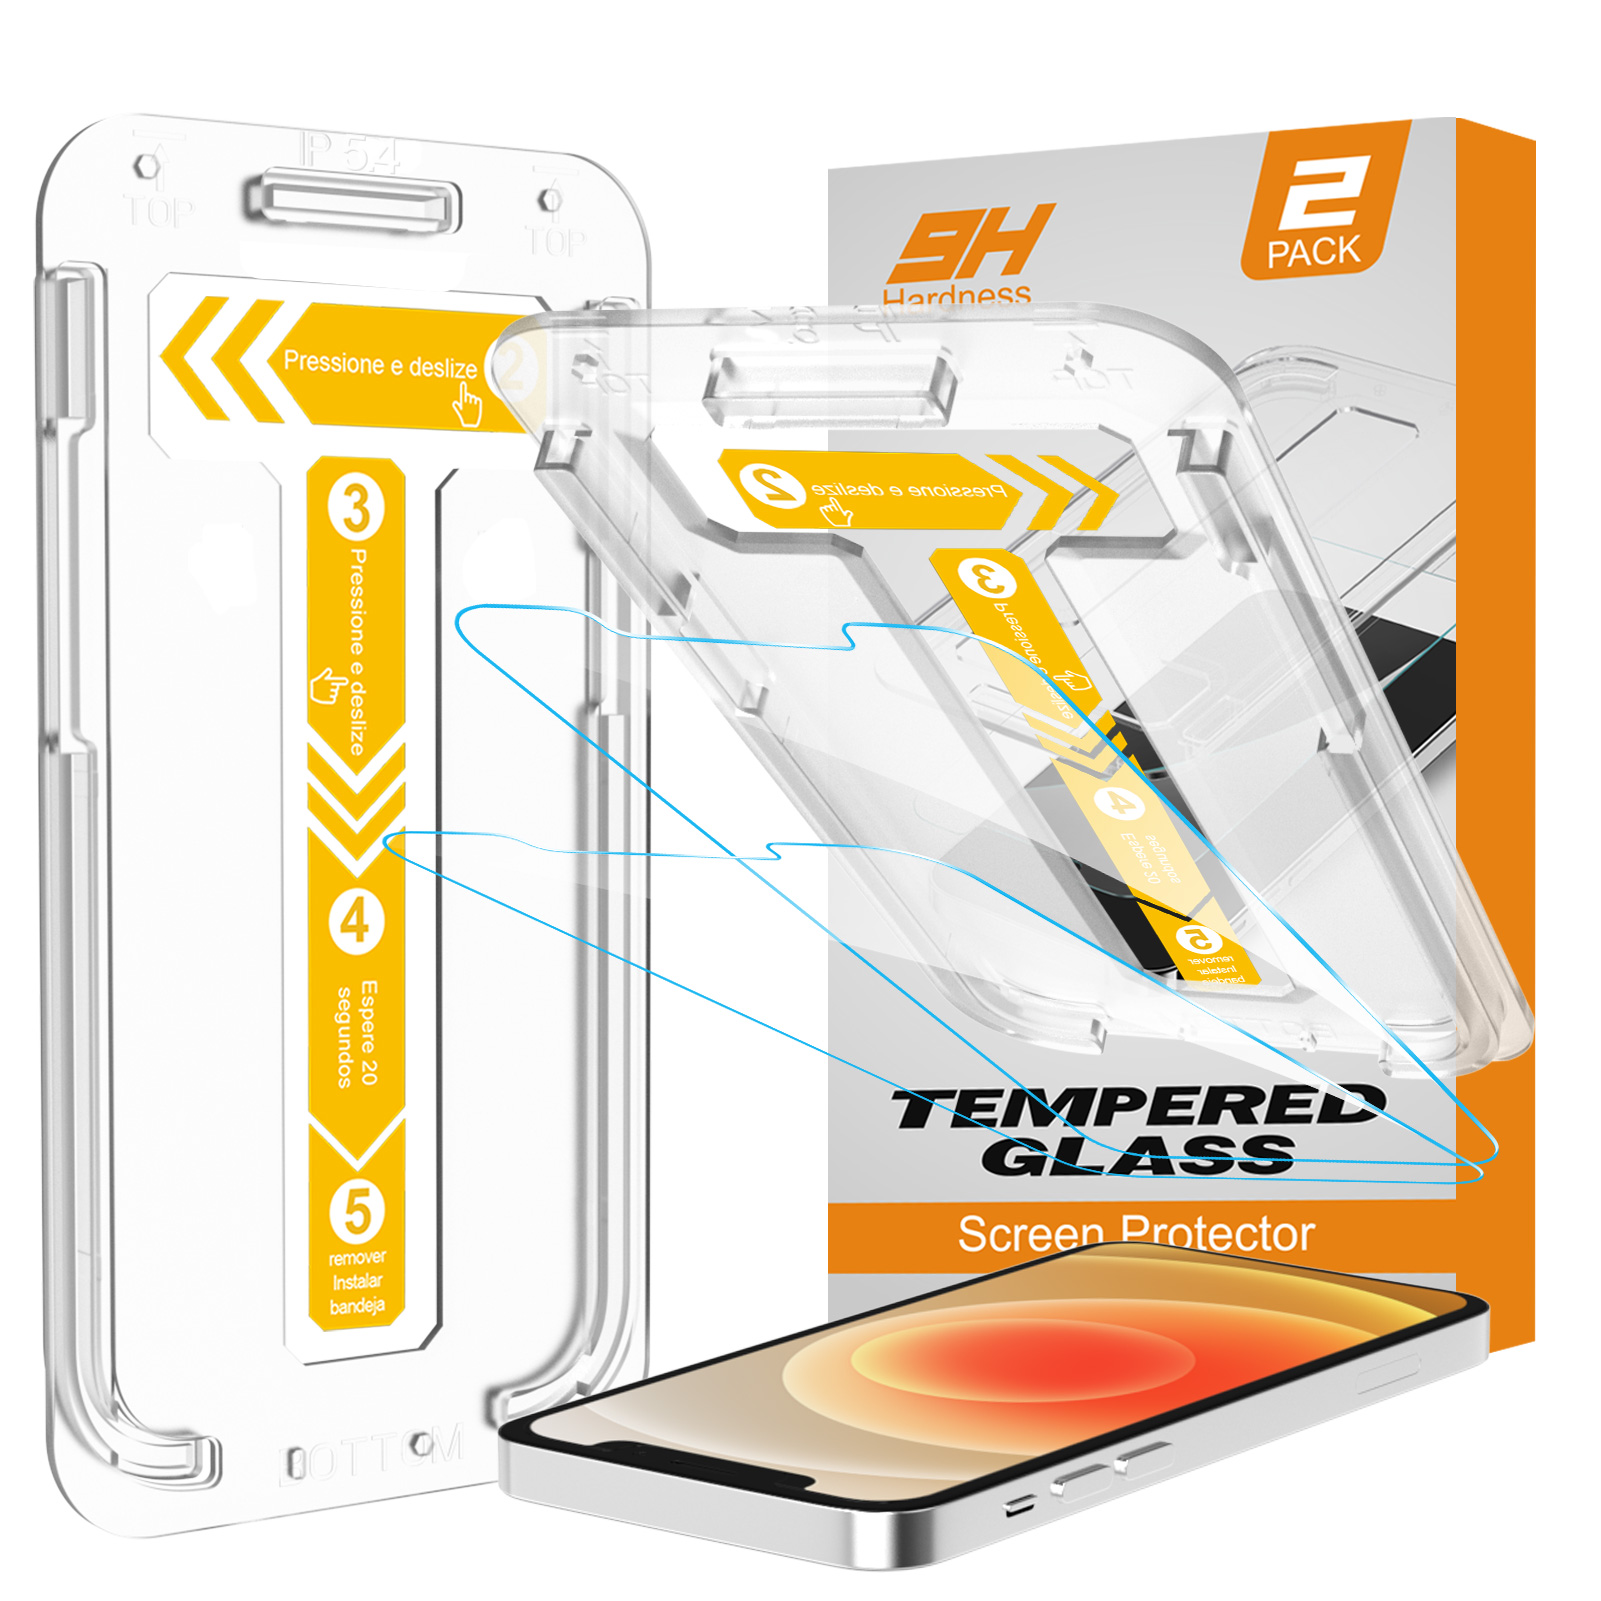 Mohave 2Pack Screen Protector compatible with iPhone X/XS/iPhone 11 pro(5.8-inch, 2018 Model), Tempered Glass-Mohave